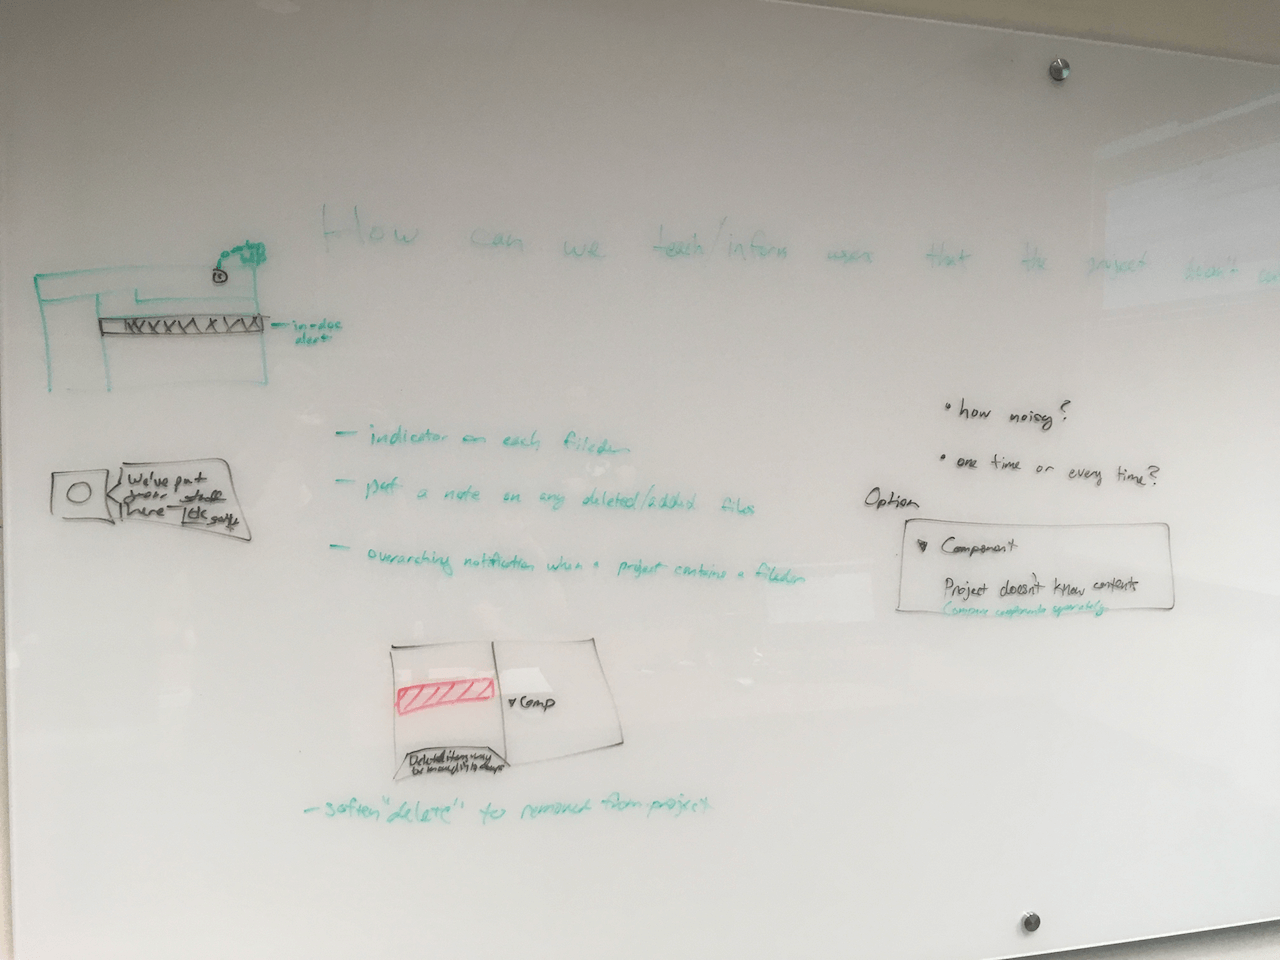 a whiteboard with text and sketches of a product exploring fileders